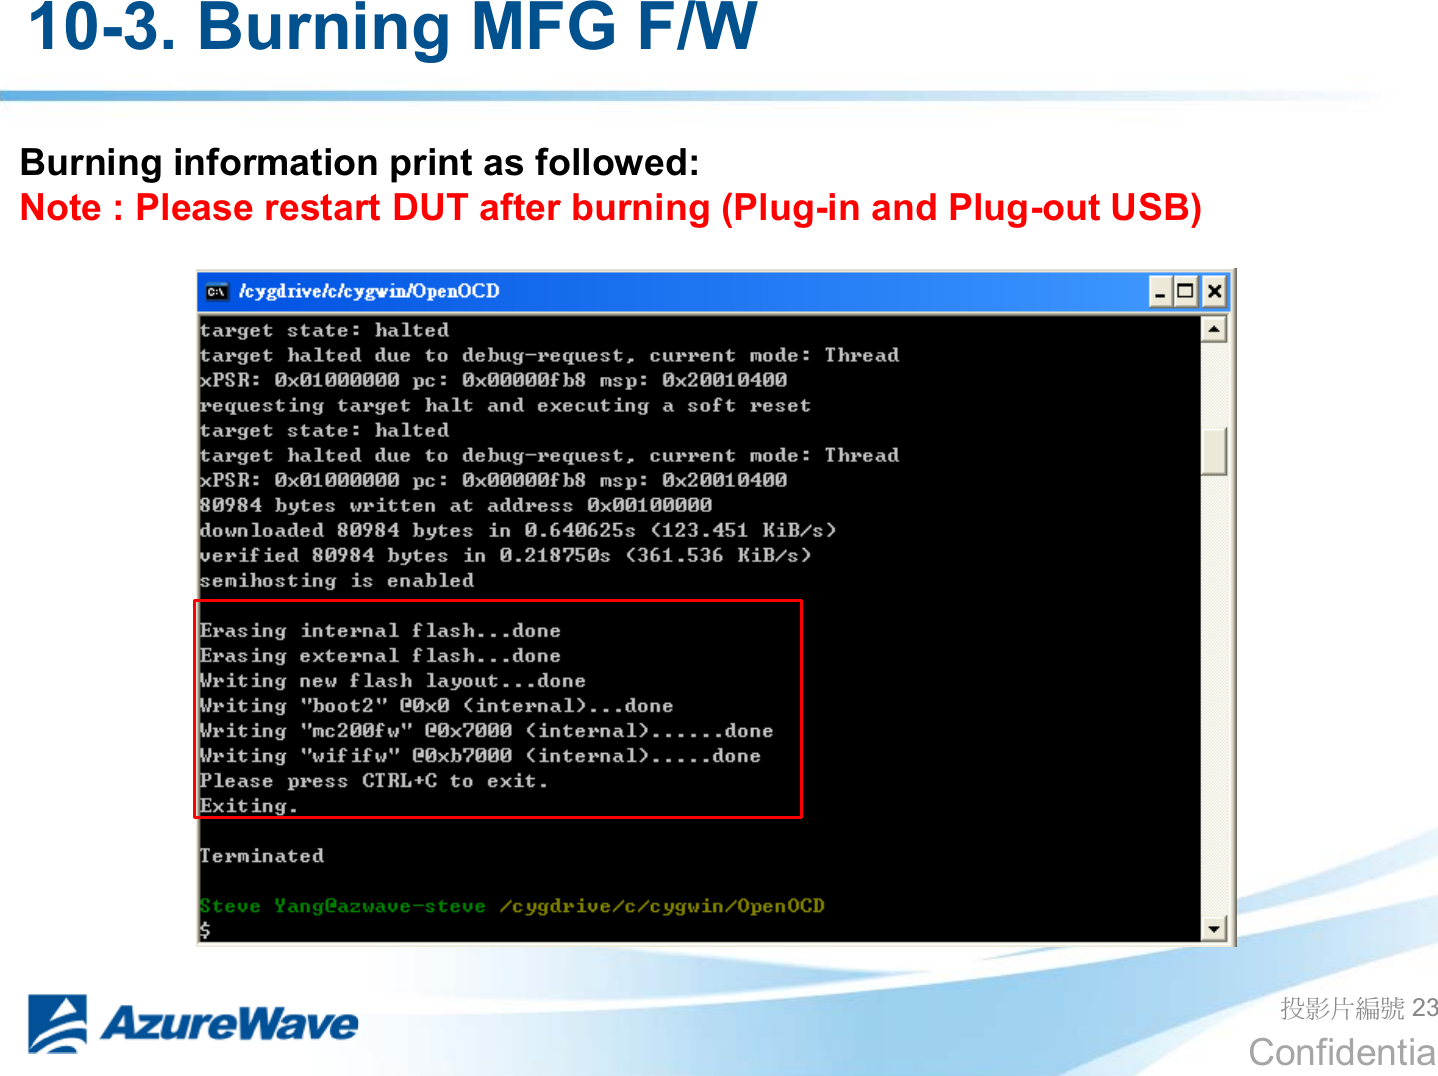 Confidential ދᐙׂᒳᇆ 23 Burning information print as followed: Note : Please restart DUT after burning (Plug-in and Plug-out USB)   10-3. Burning MFG F/W 